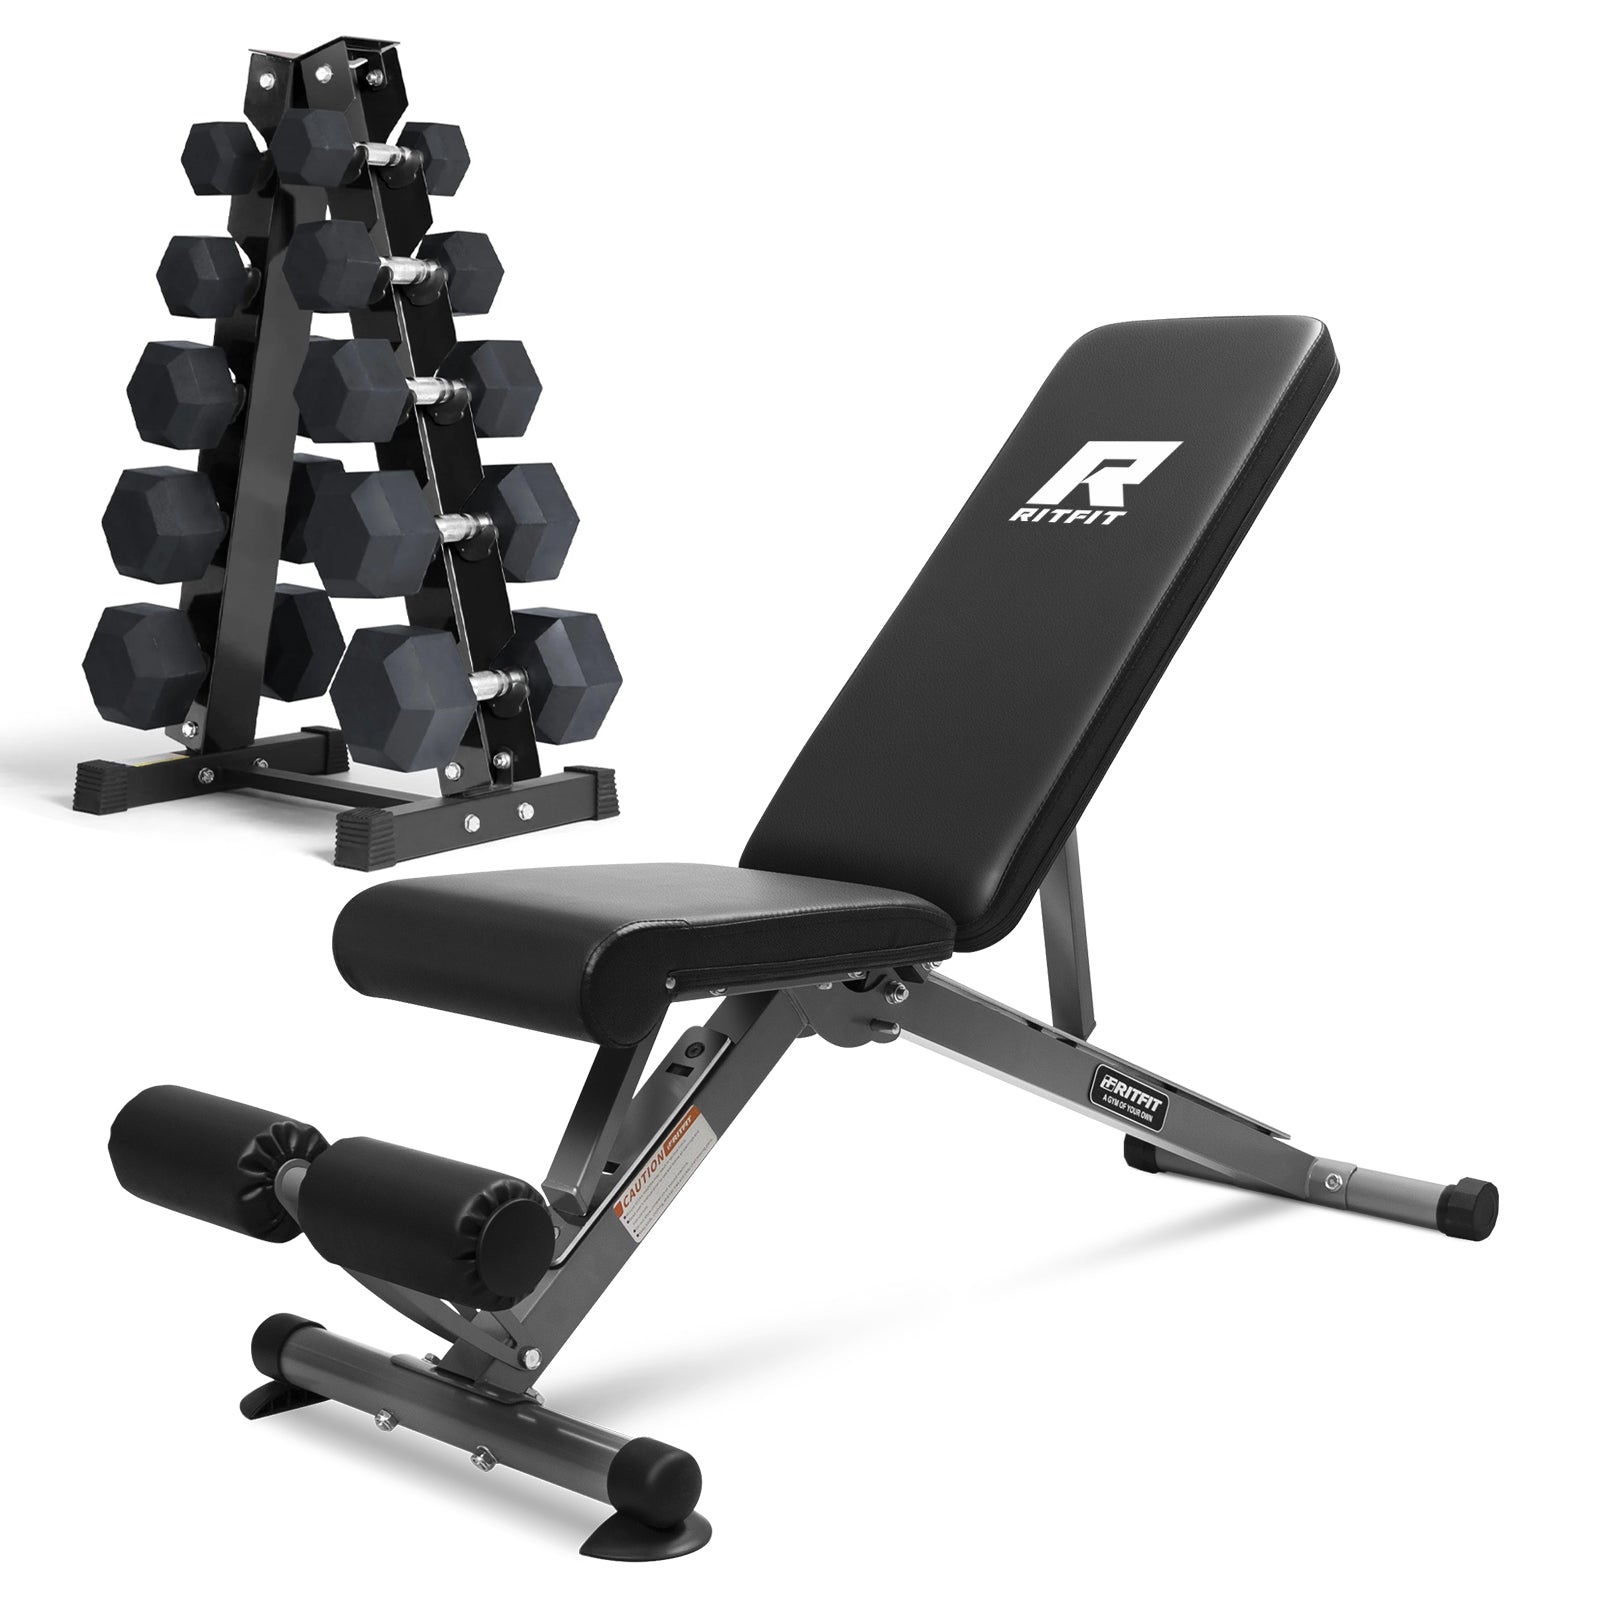 PWB01 Adjustable Foldable Weight Bench - RitFit